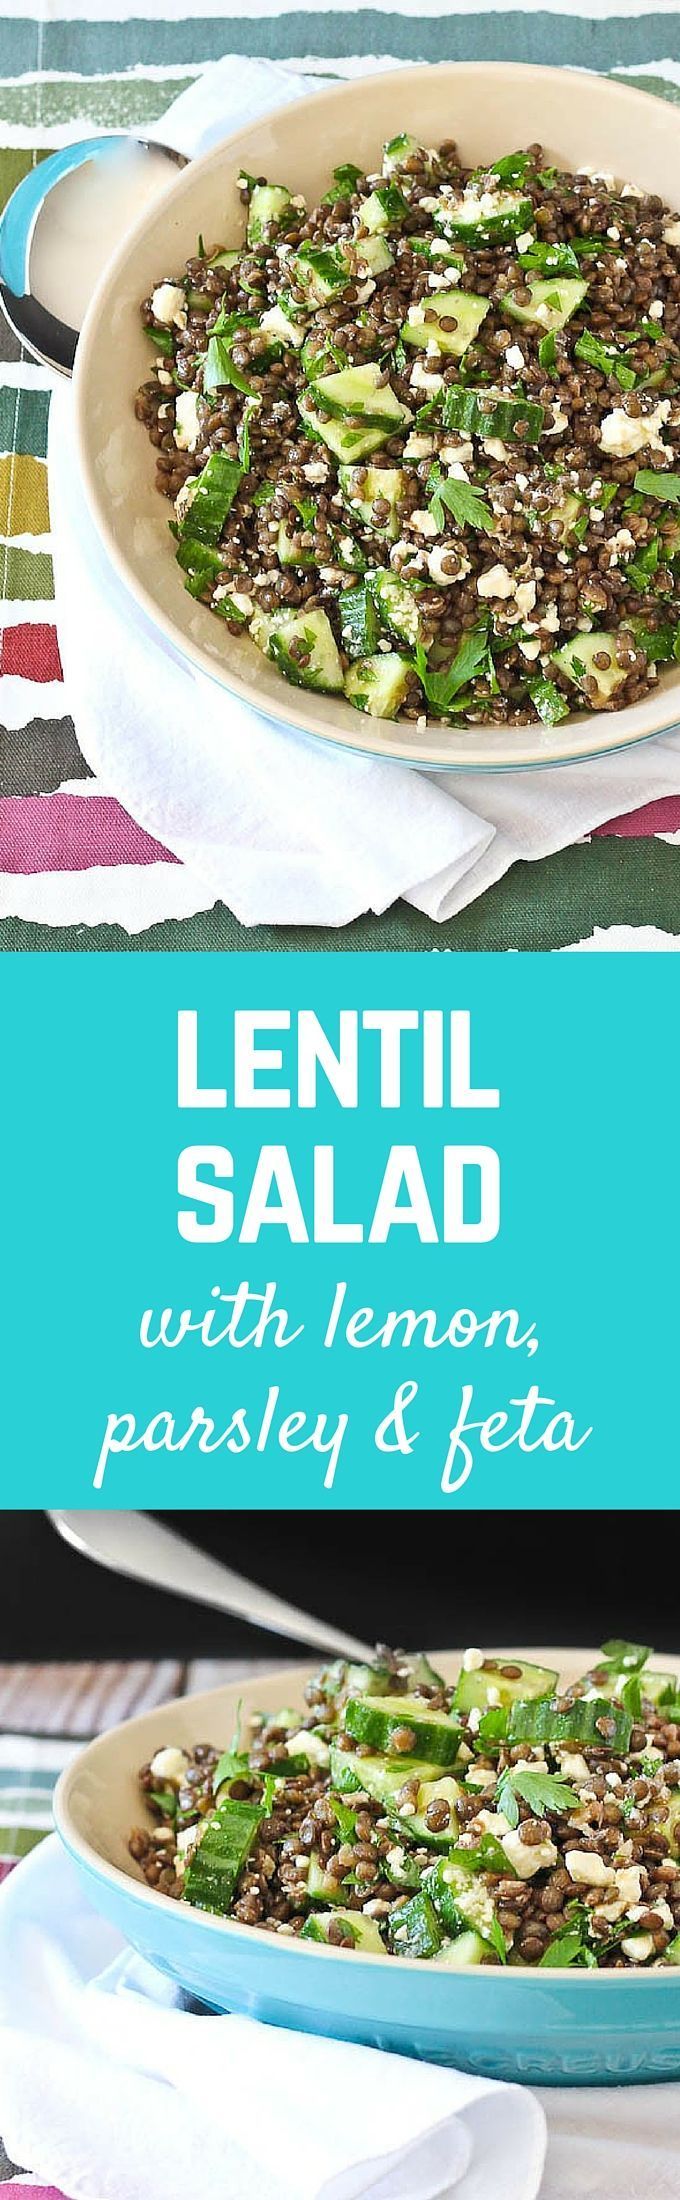 Filling, satisfying, and flavorful. This lentil salad recipe with feta, lemon, and parsley is perfect for meal prep days and